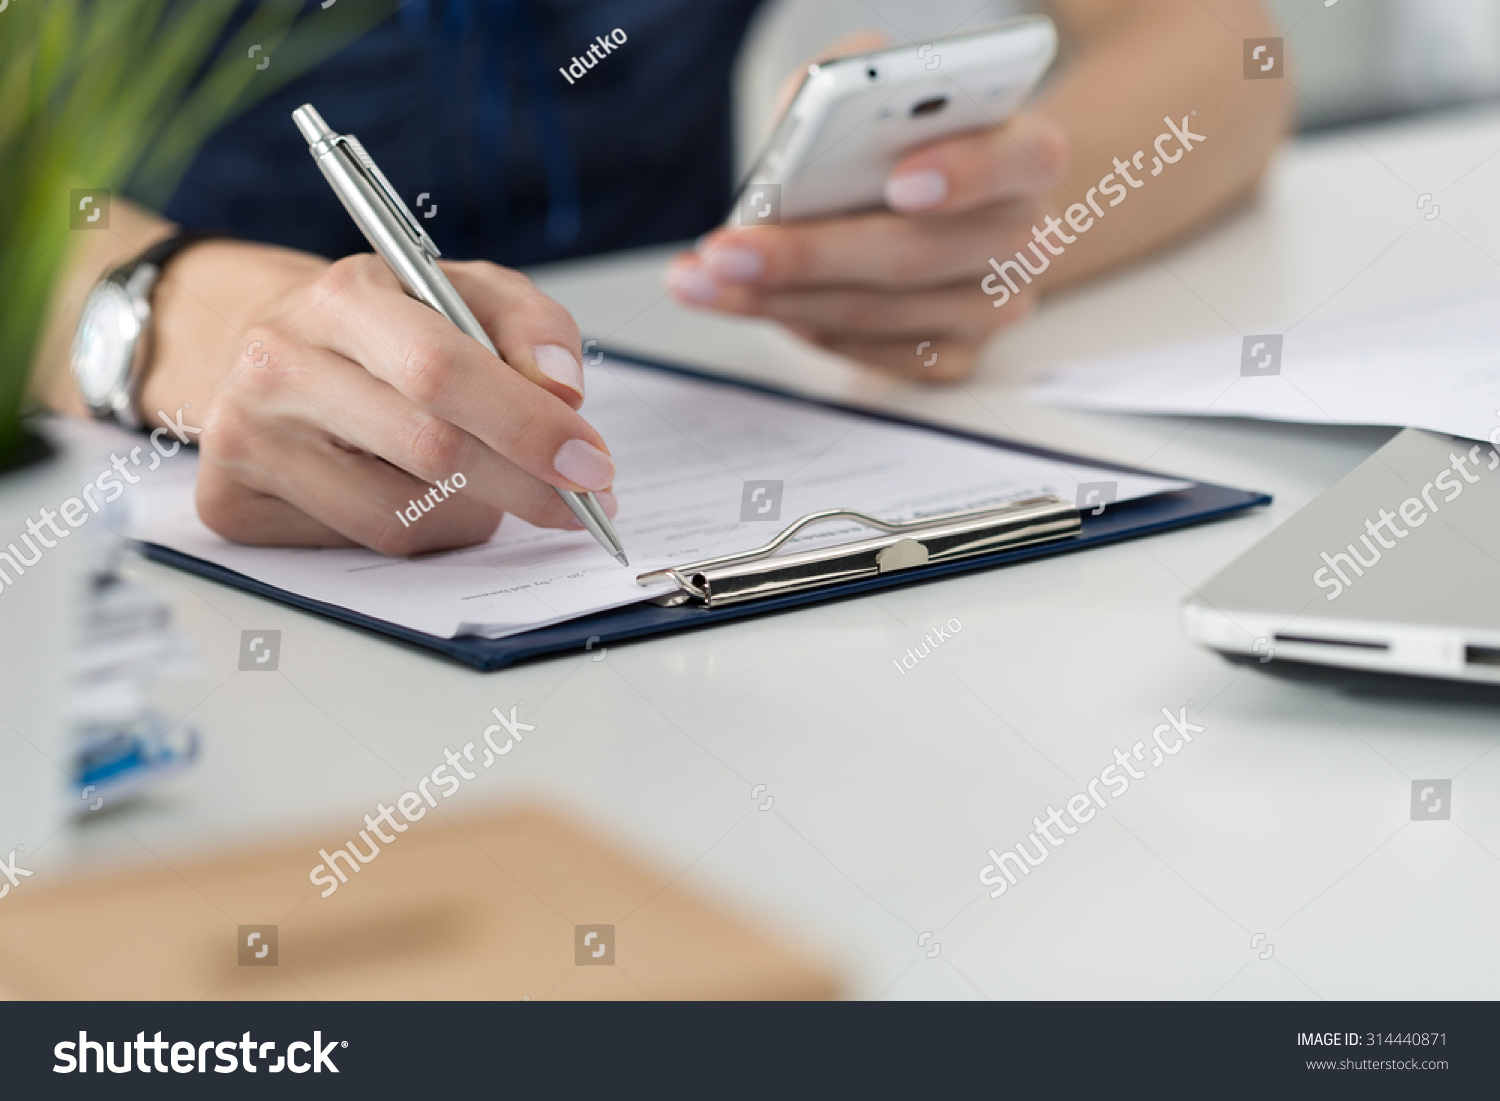 Close-up of female hands. Woman writting something and looking at mobile phone screen sitting at her office #314440871